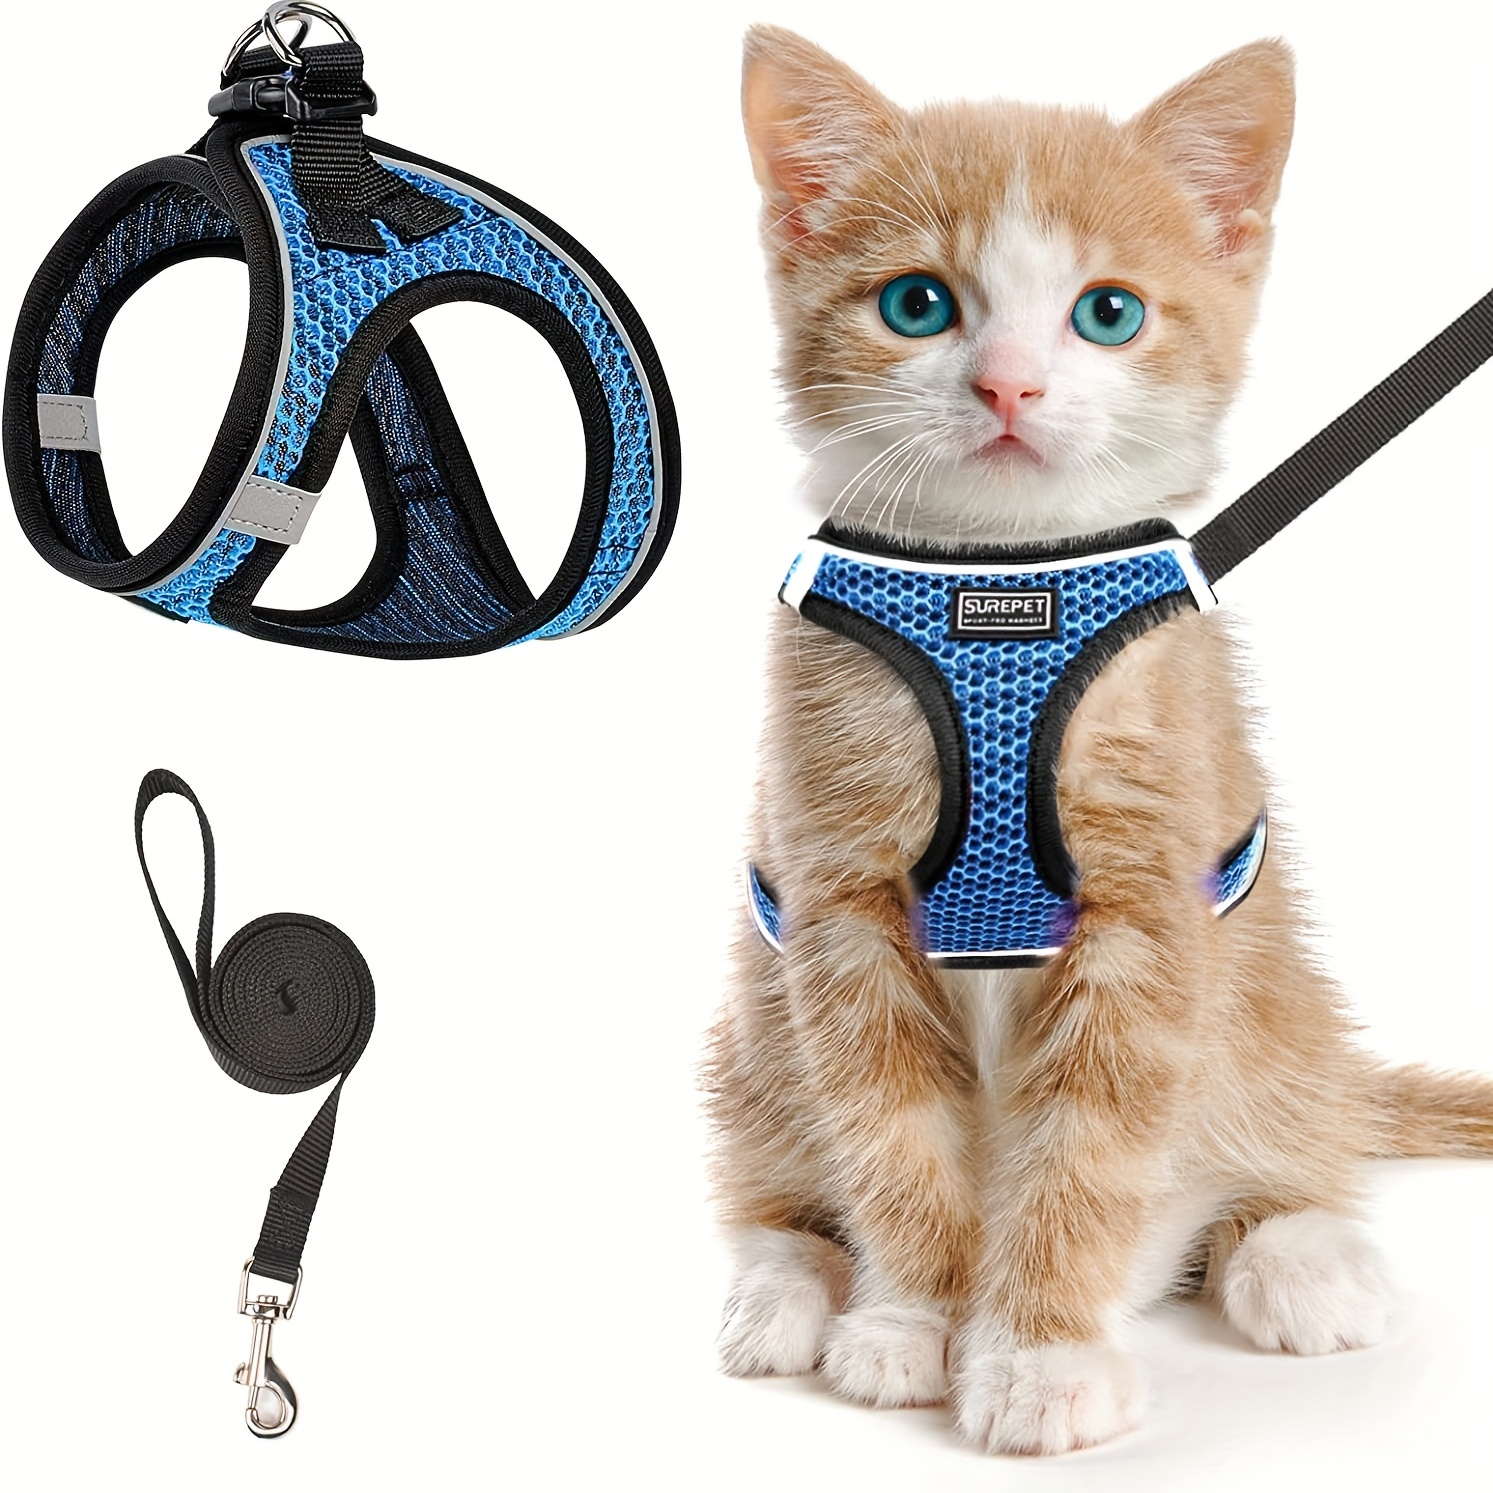 Double G Quilted Harness & Leash, Paws Circle